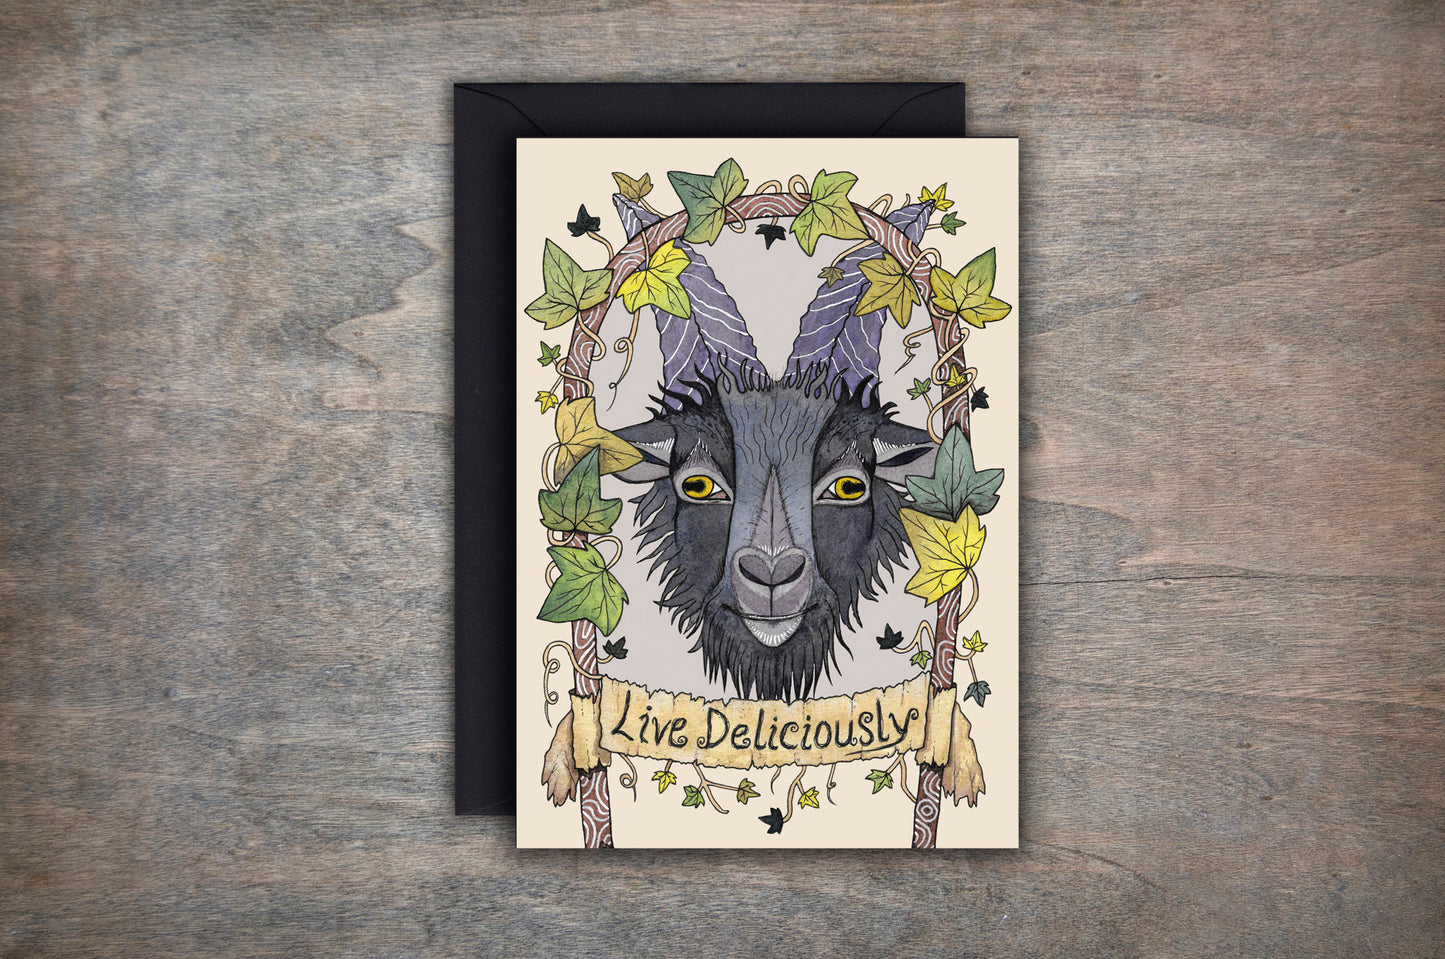 Black Phillip Greetings Card & Envelope - The VVitch Goat Illustrated Card - Live Deliciously - Witchy Pagan Goth Halloween Solstice Card